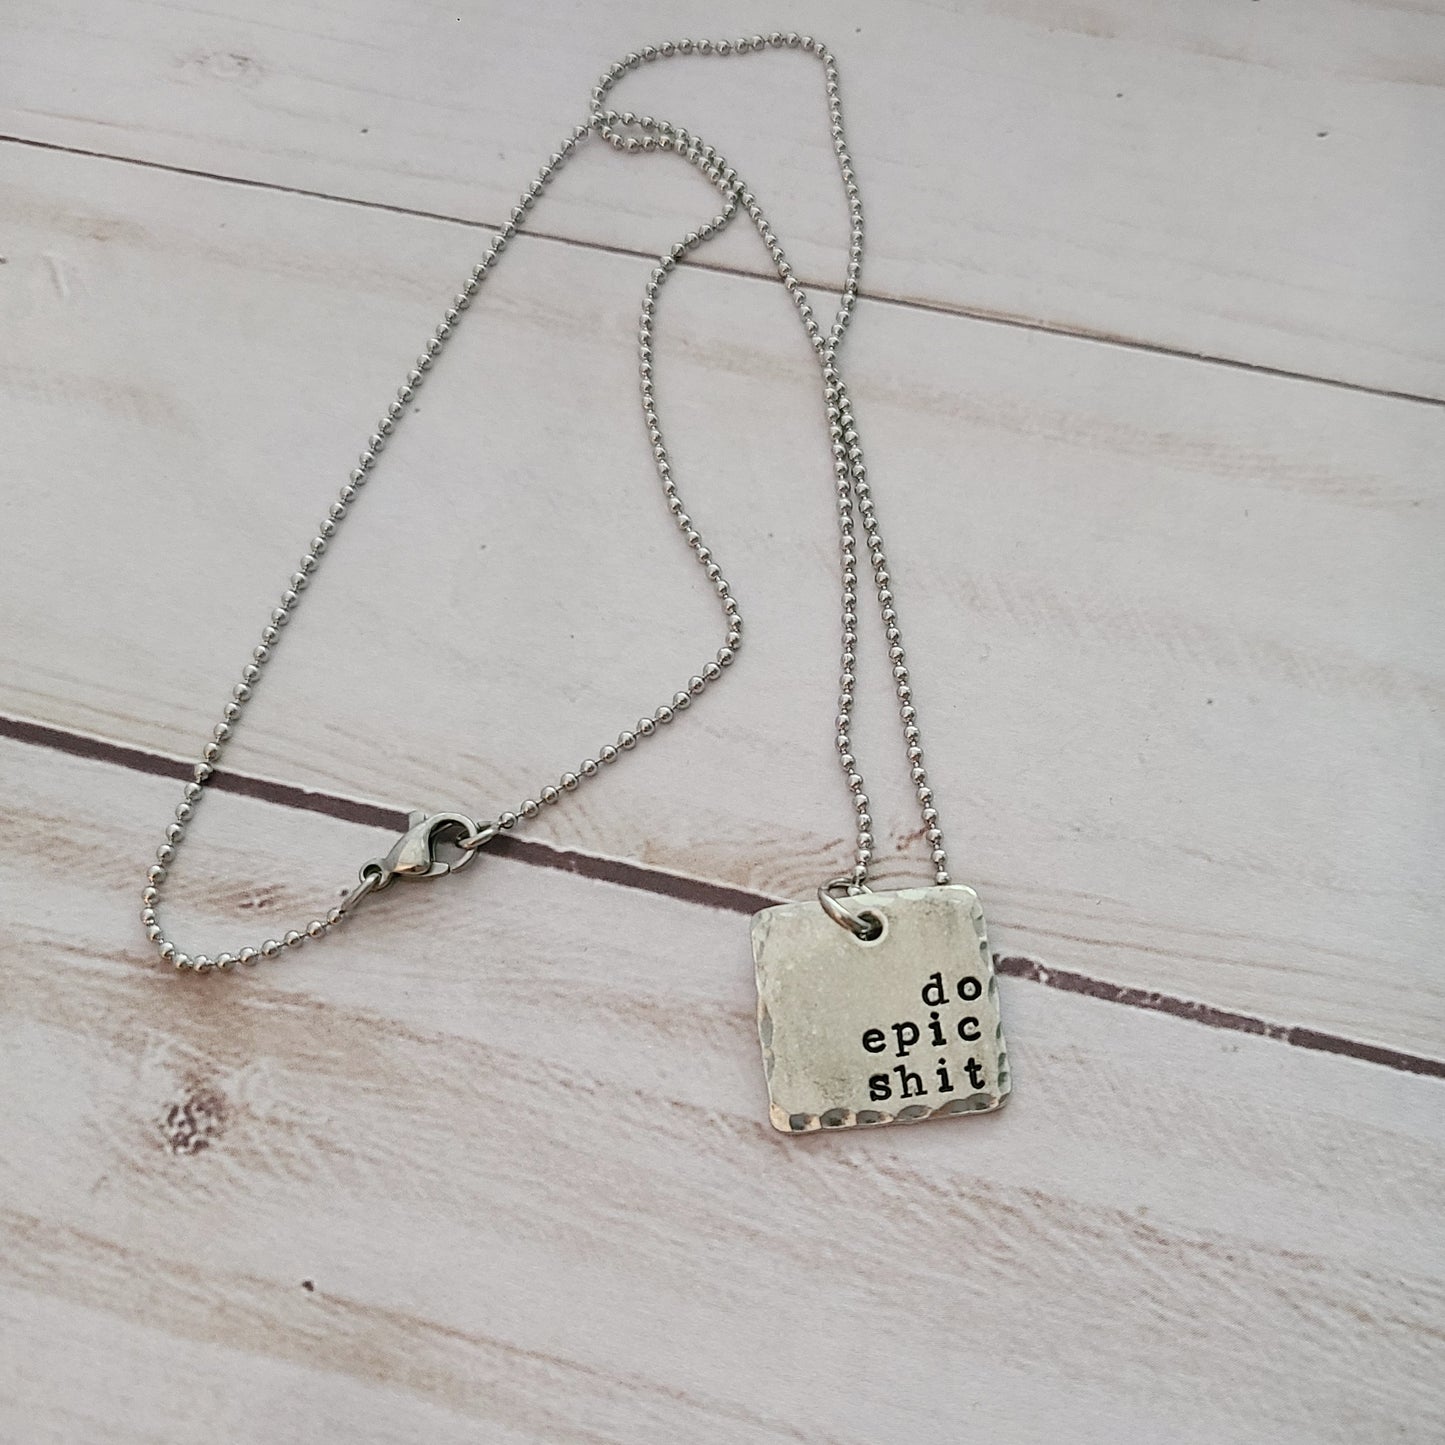 Do Epic Shit - Square Pewter Necklace